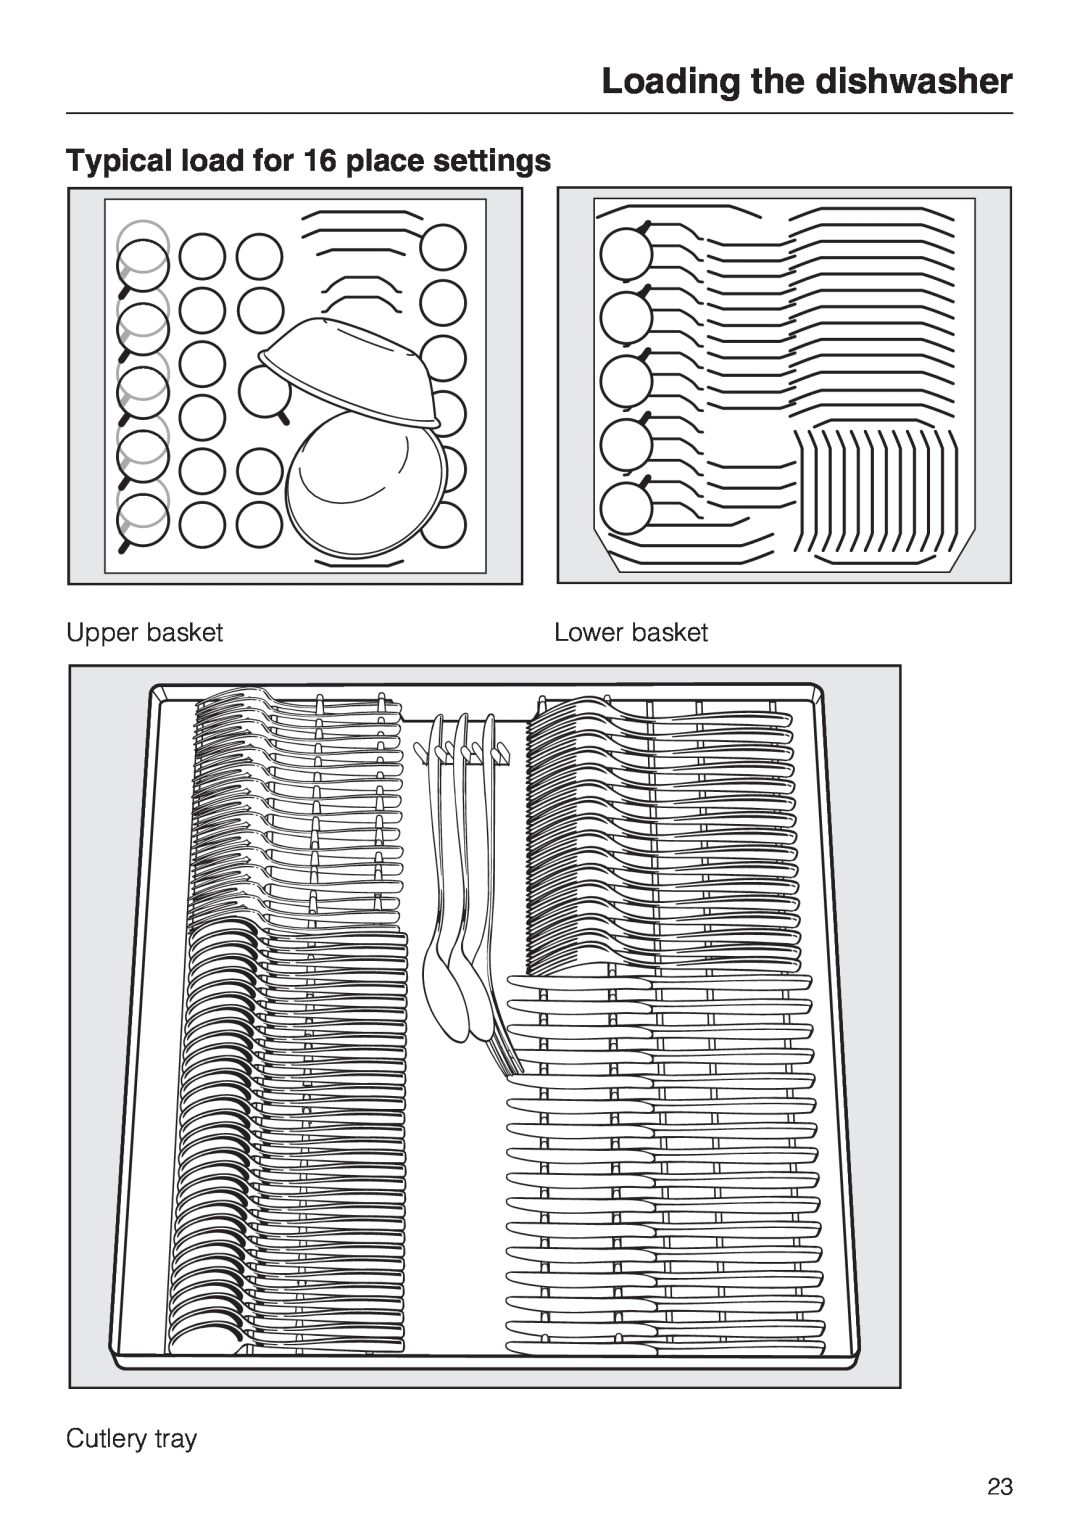 Miele G 5910, G 5915 operating instructions Typical load for 16 place settings, Loading the dishwasher 